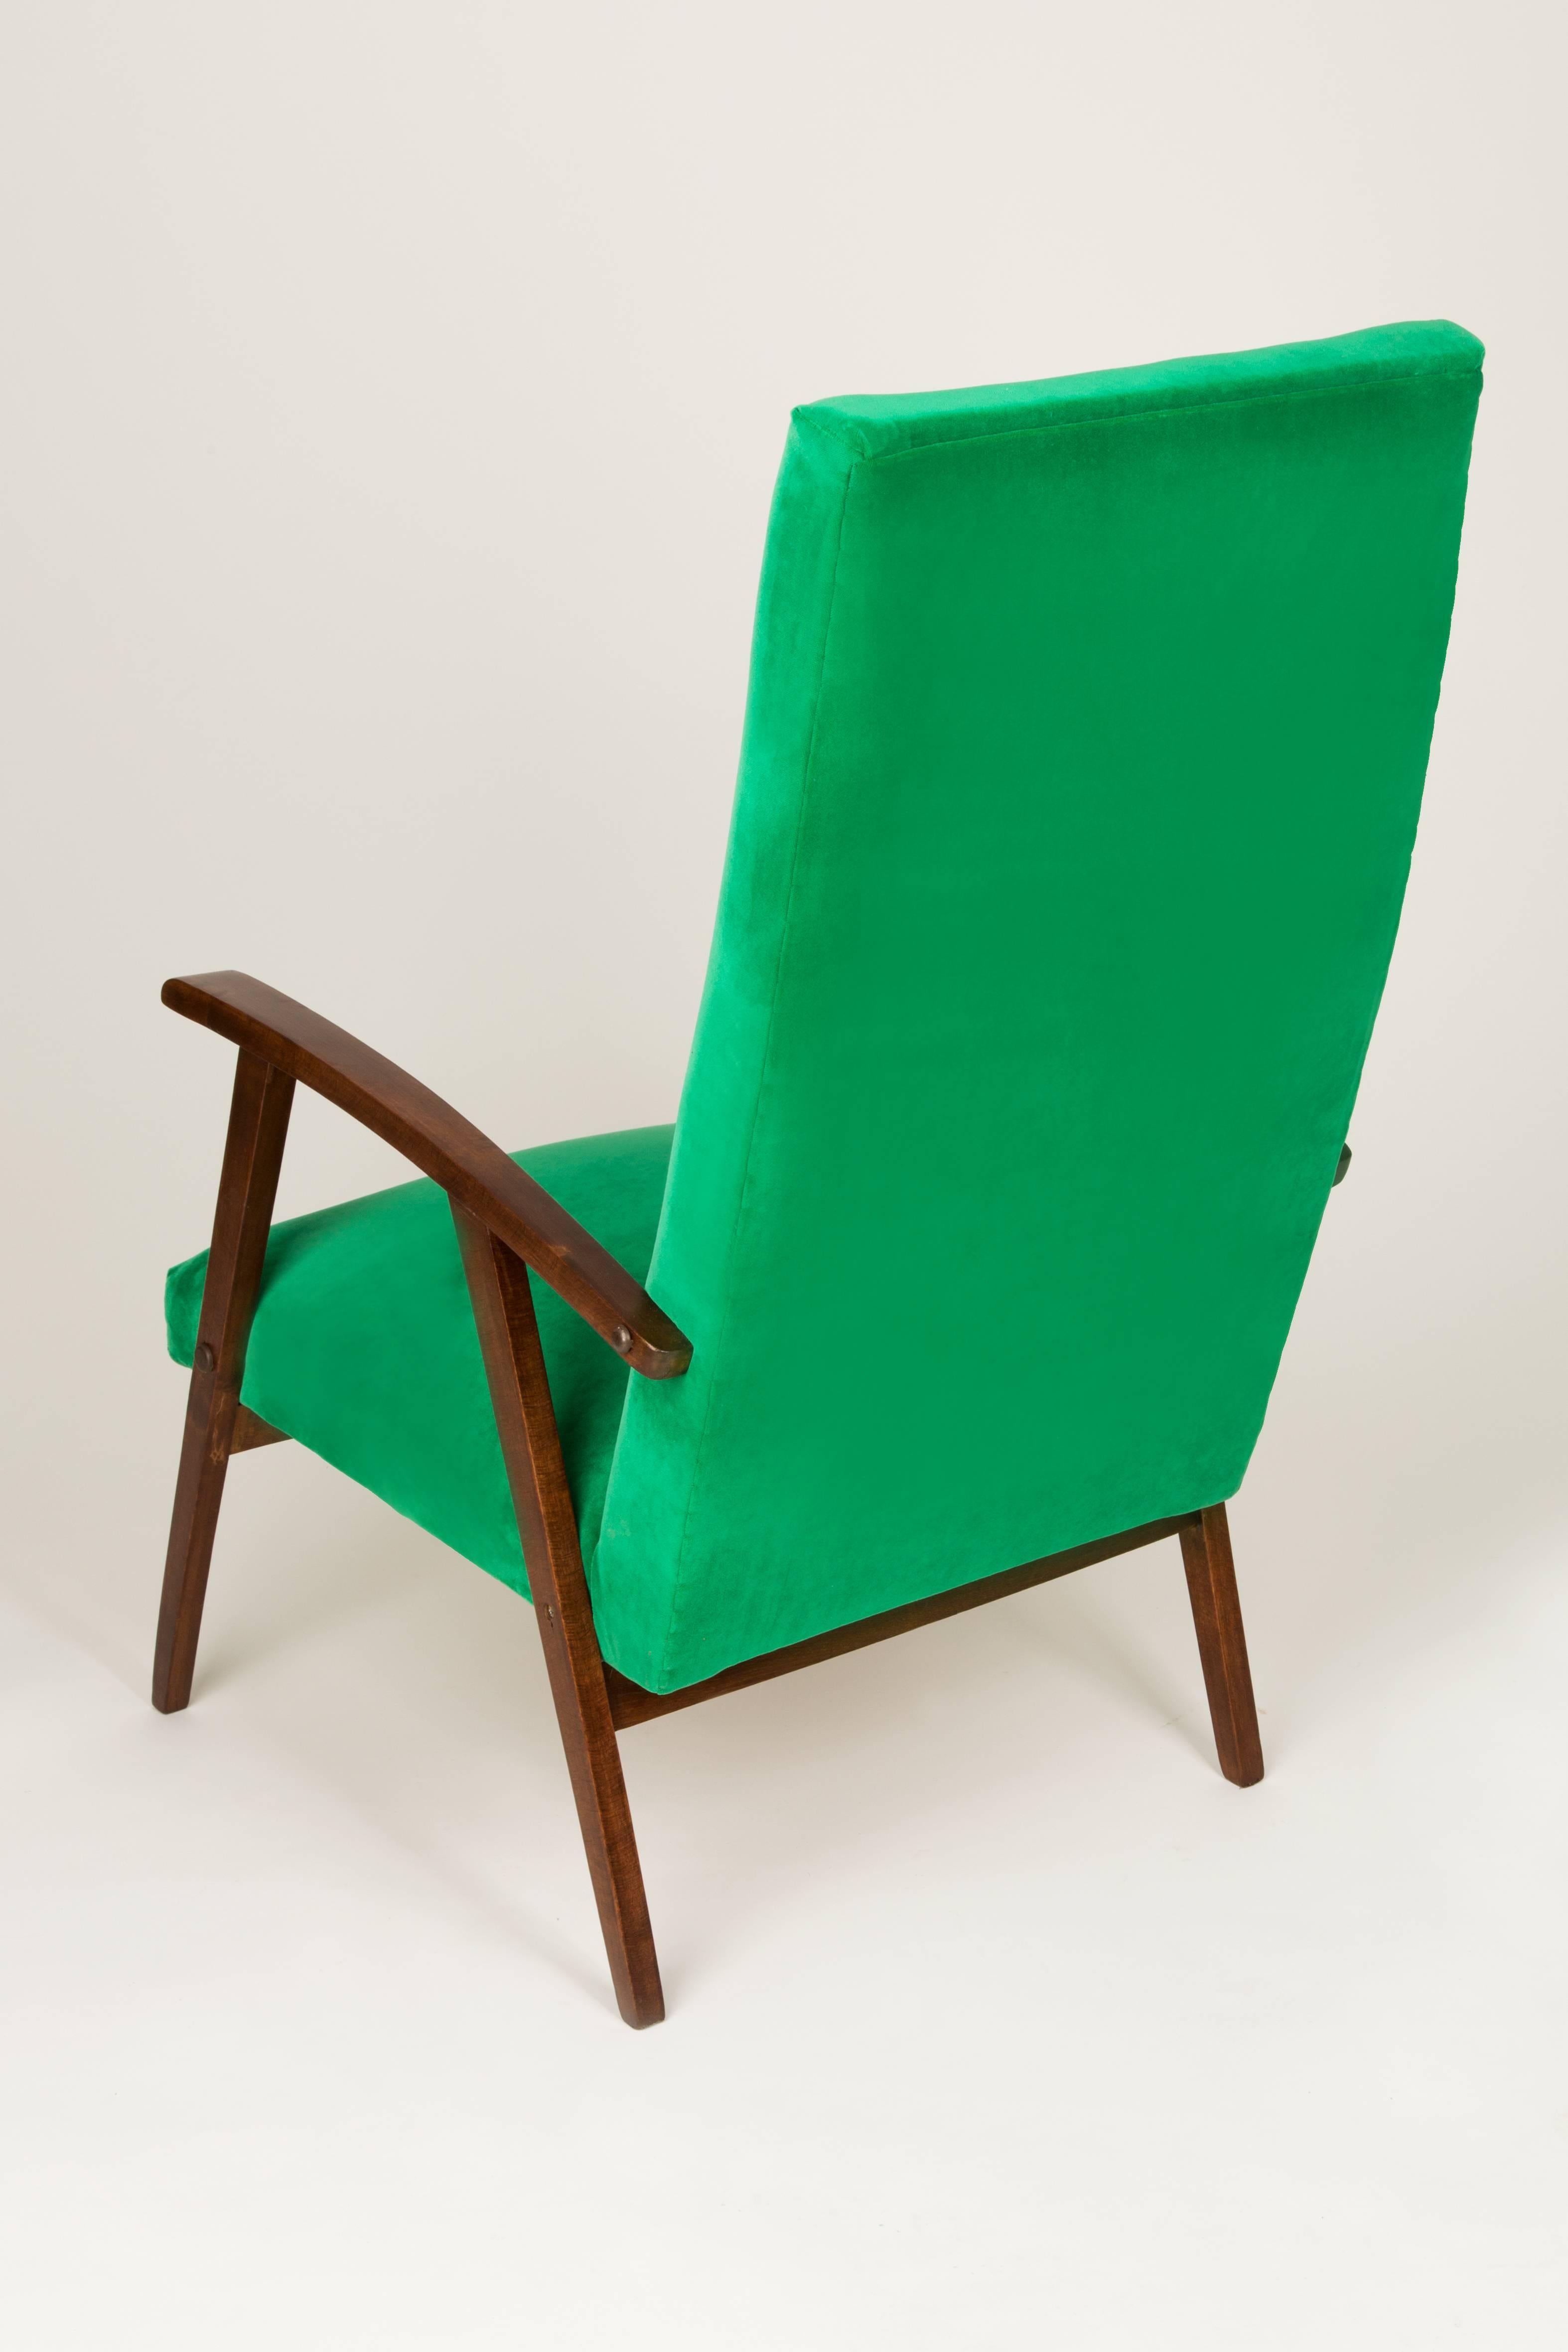 Hand-Crafted Art Deco, Vintage Green Velvet Armchair, 1960s For Sale